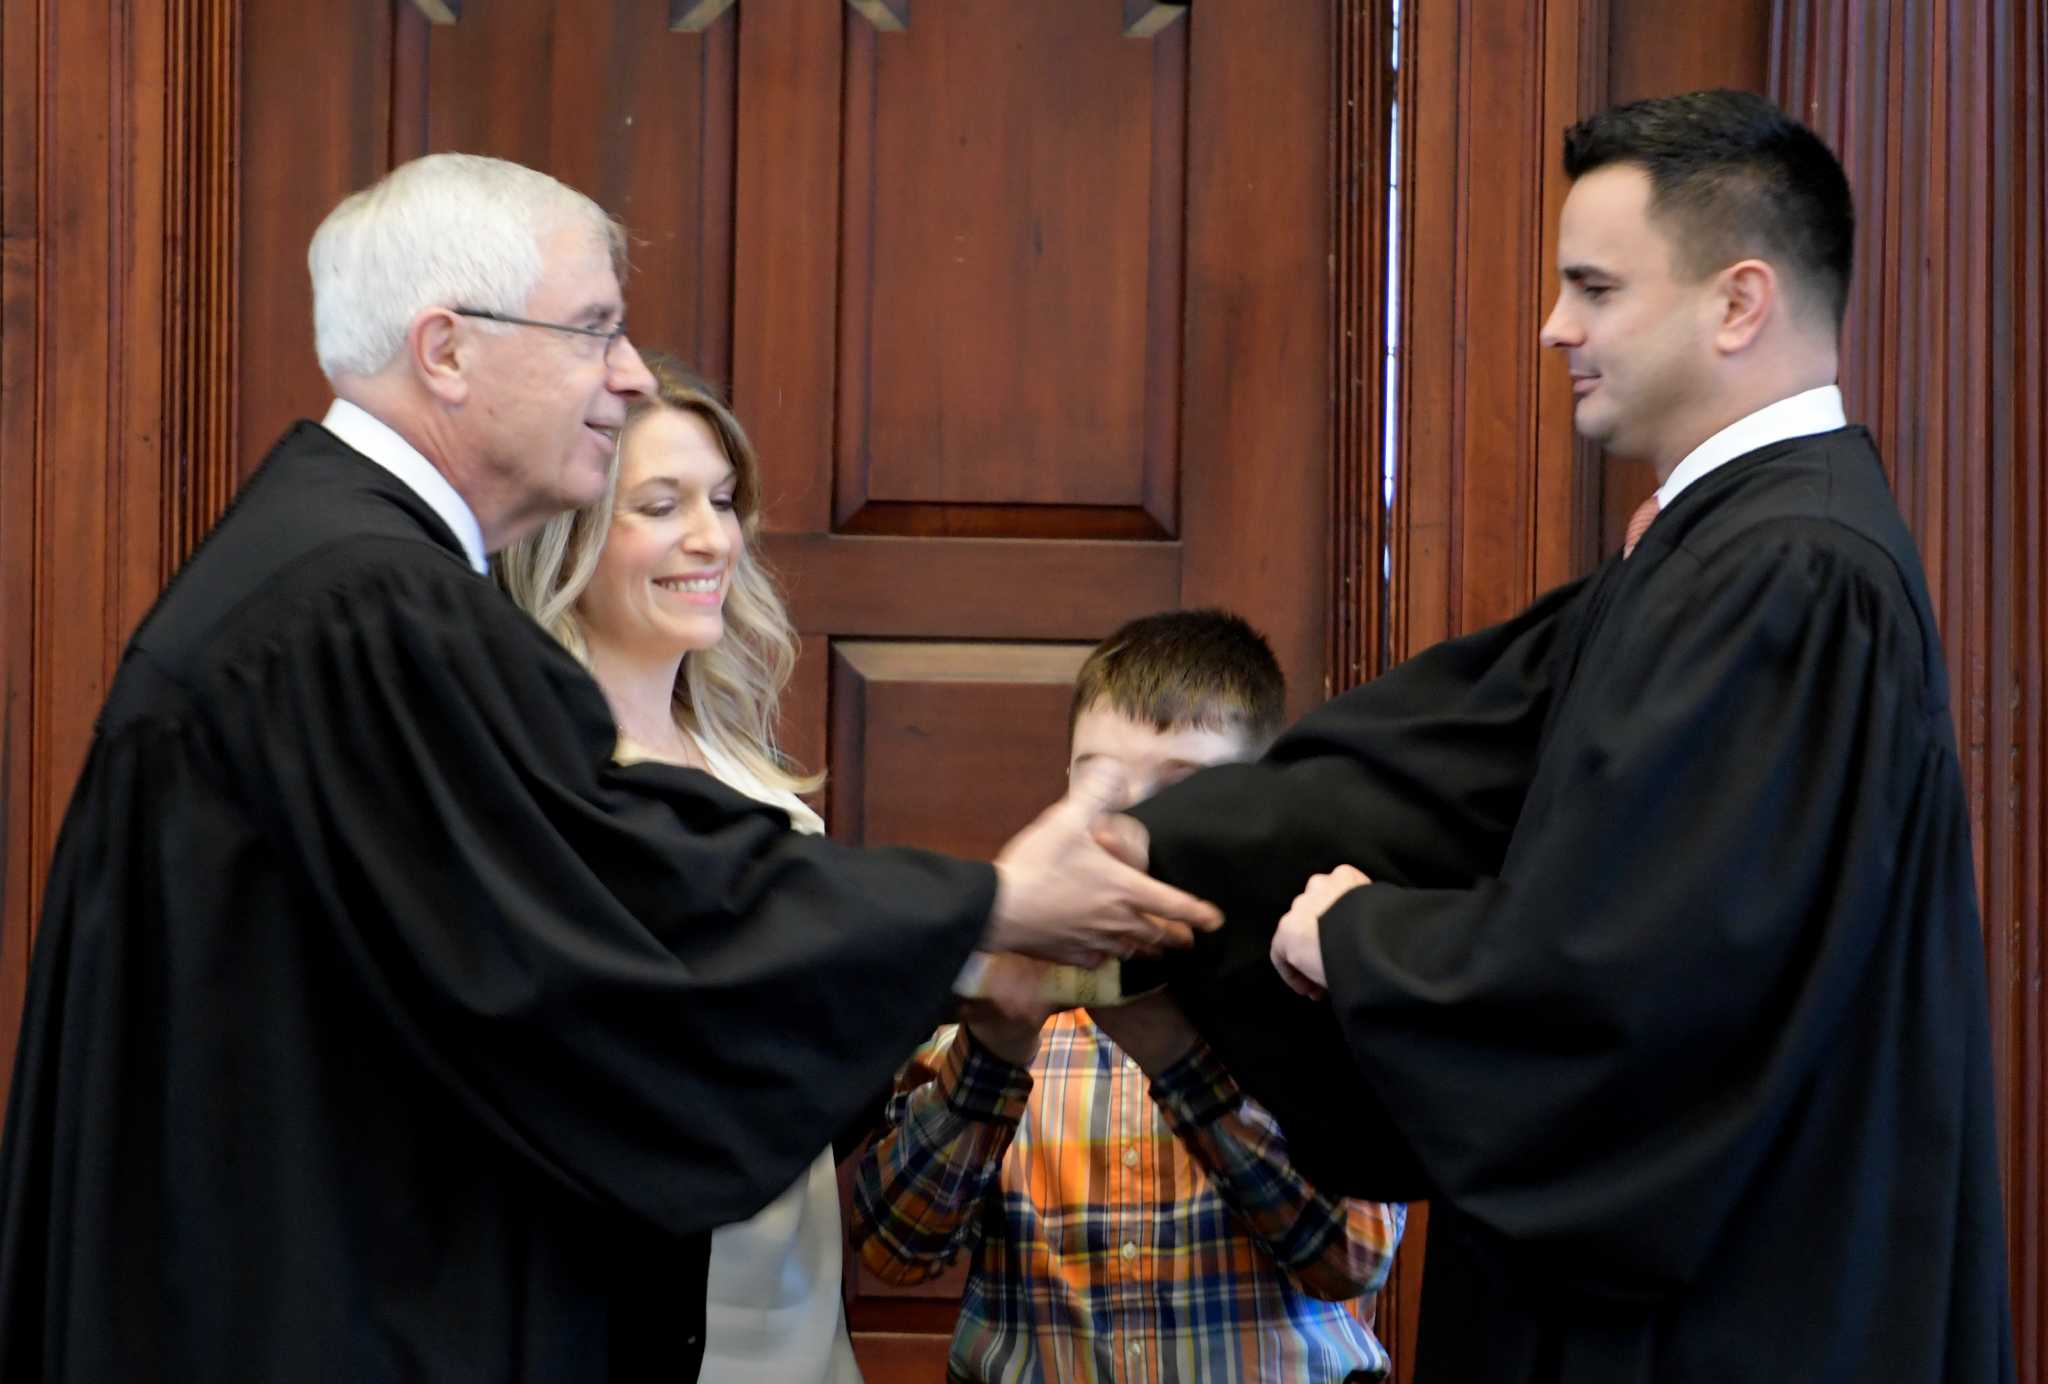 Rensselaer County Judge Patrick McGrath is leaving the bench after 37 years